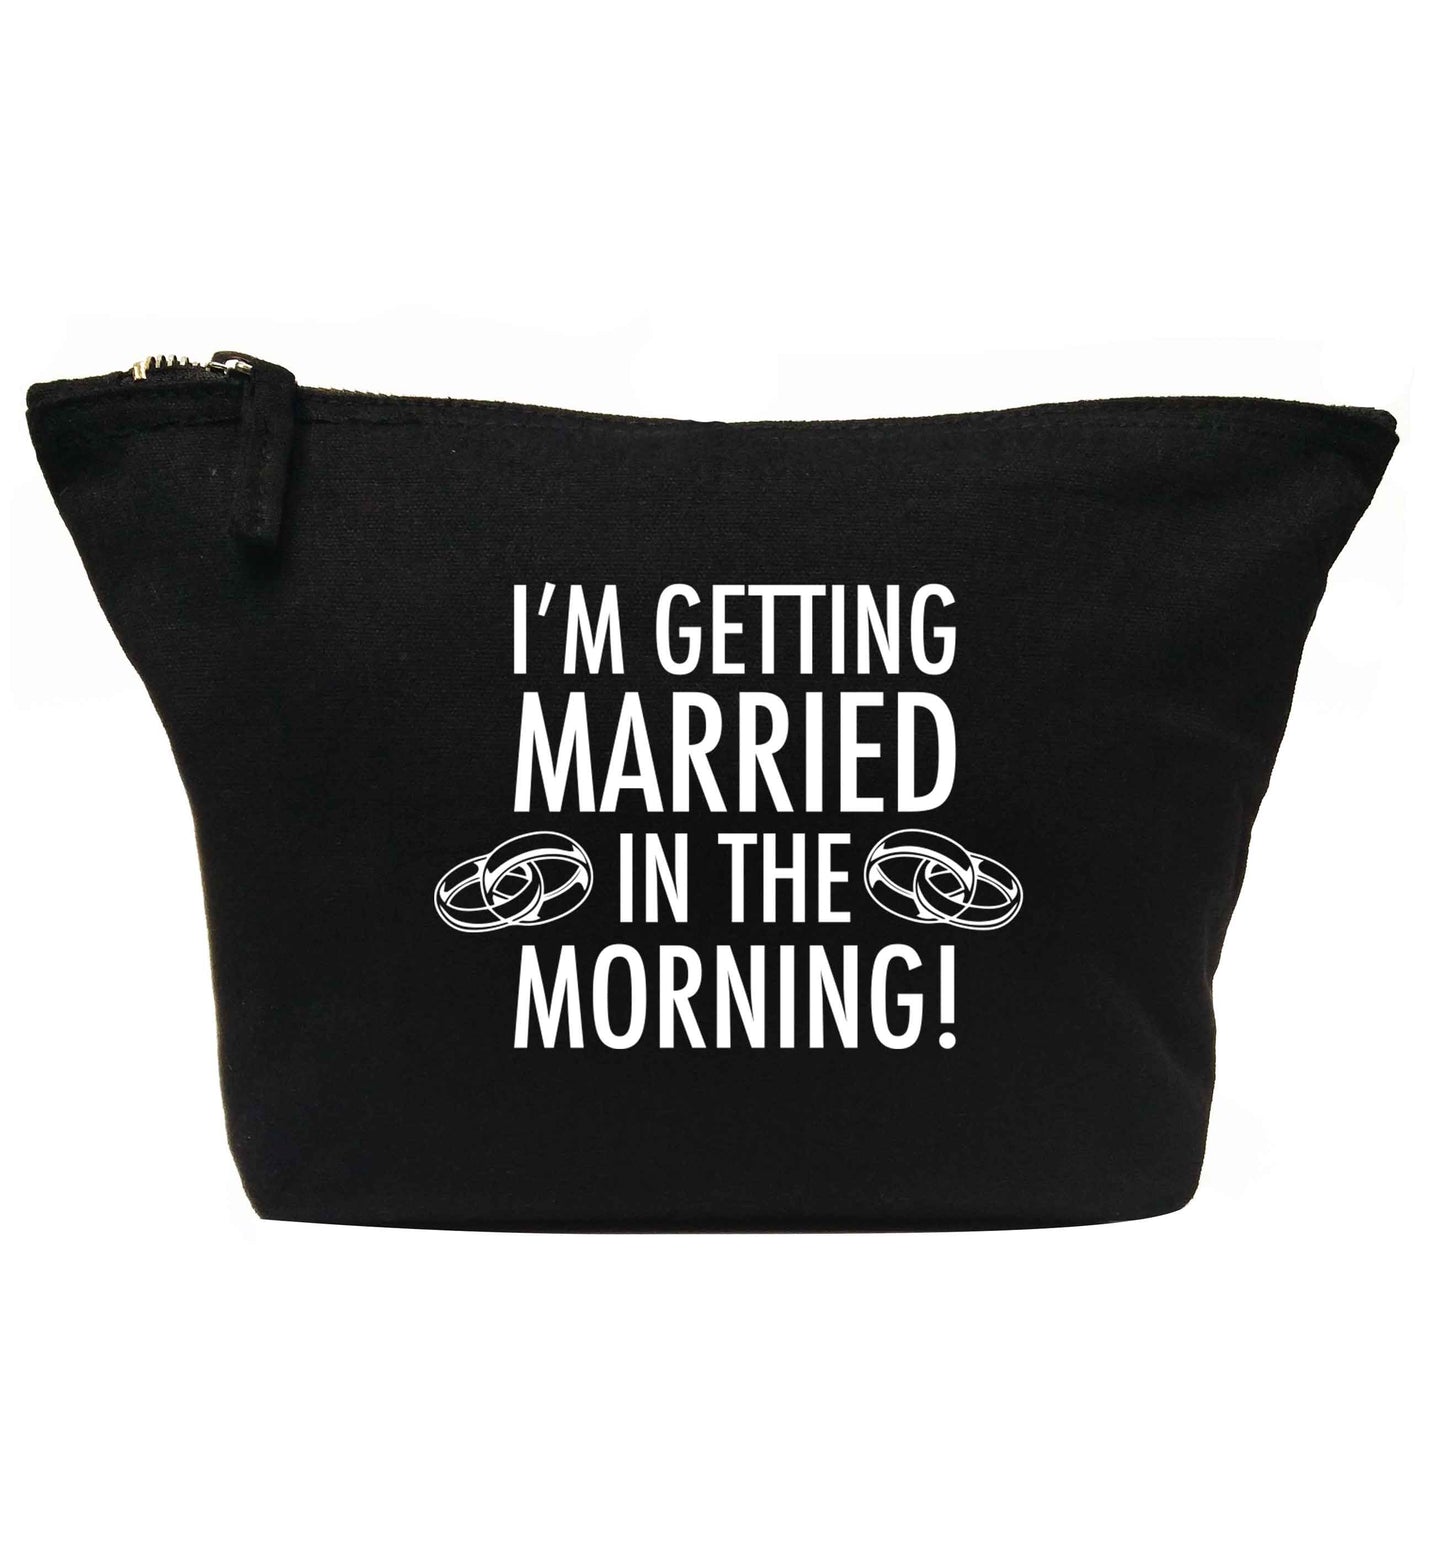 I'm getting married in the morning! | Makeup / wash bag